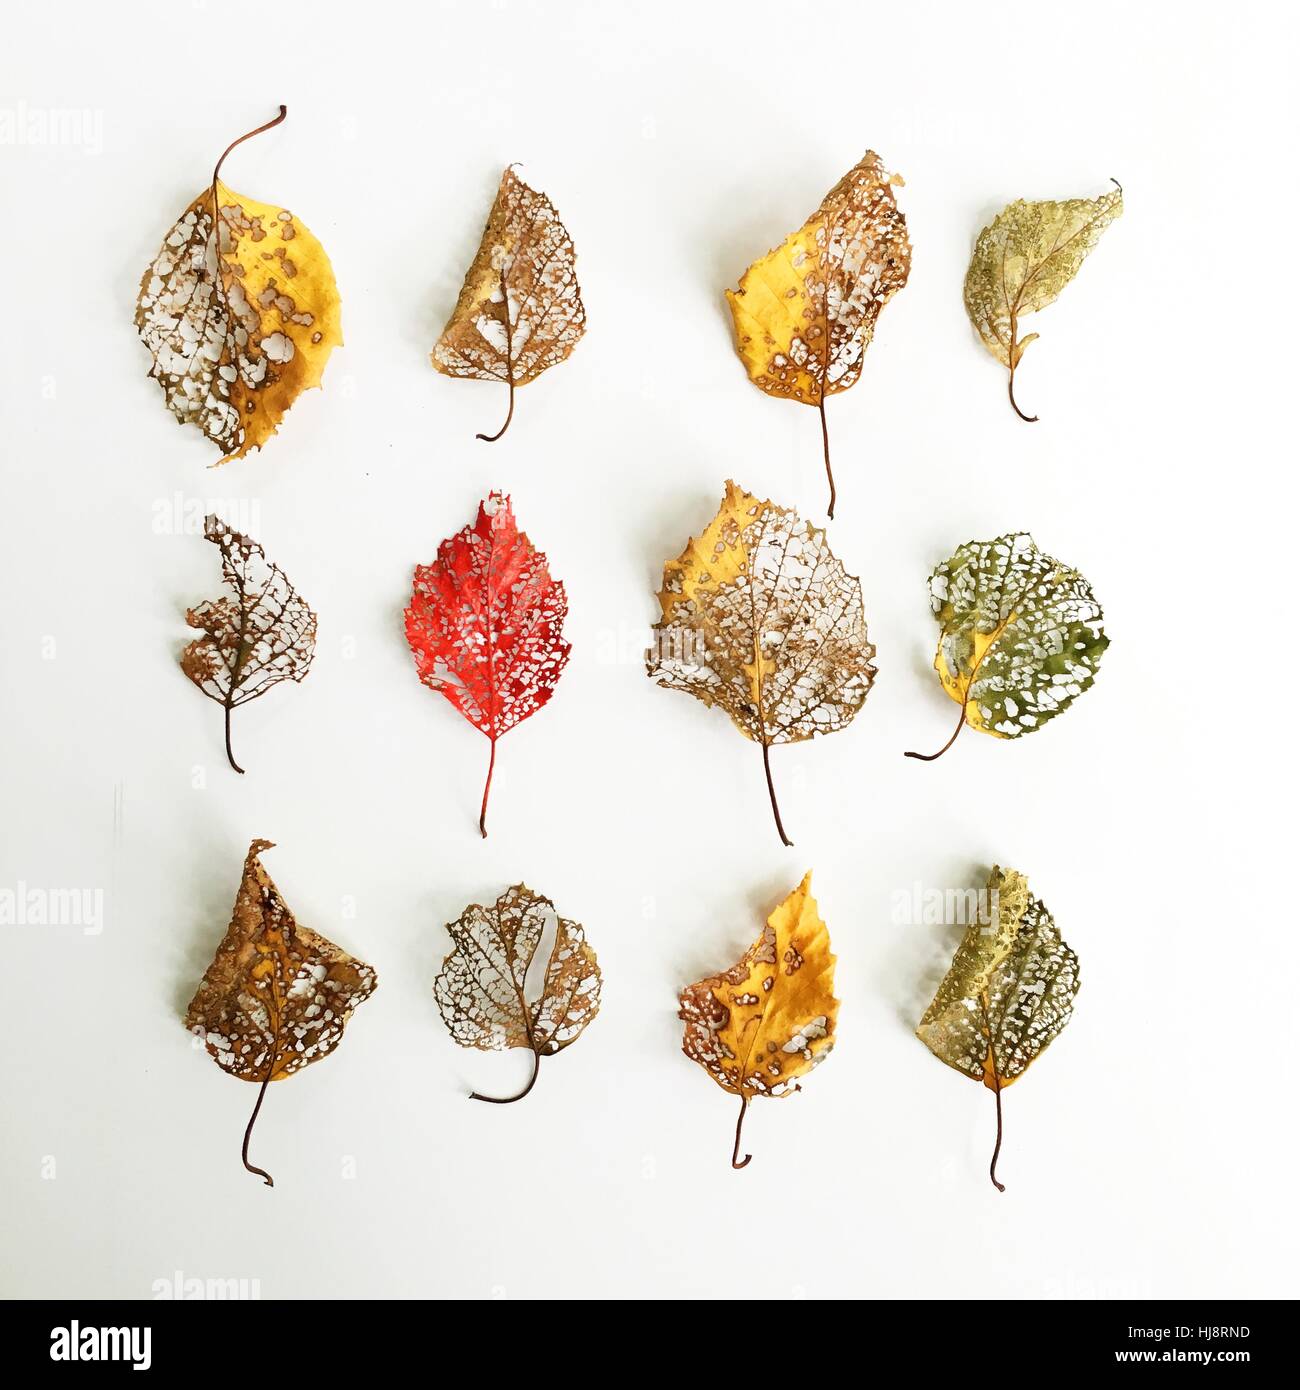 Decaying autumn leaves Stock Photo